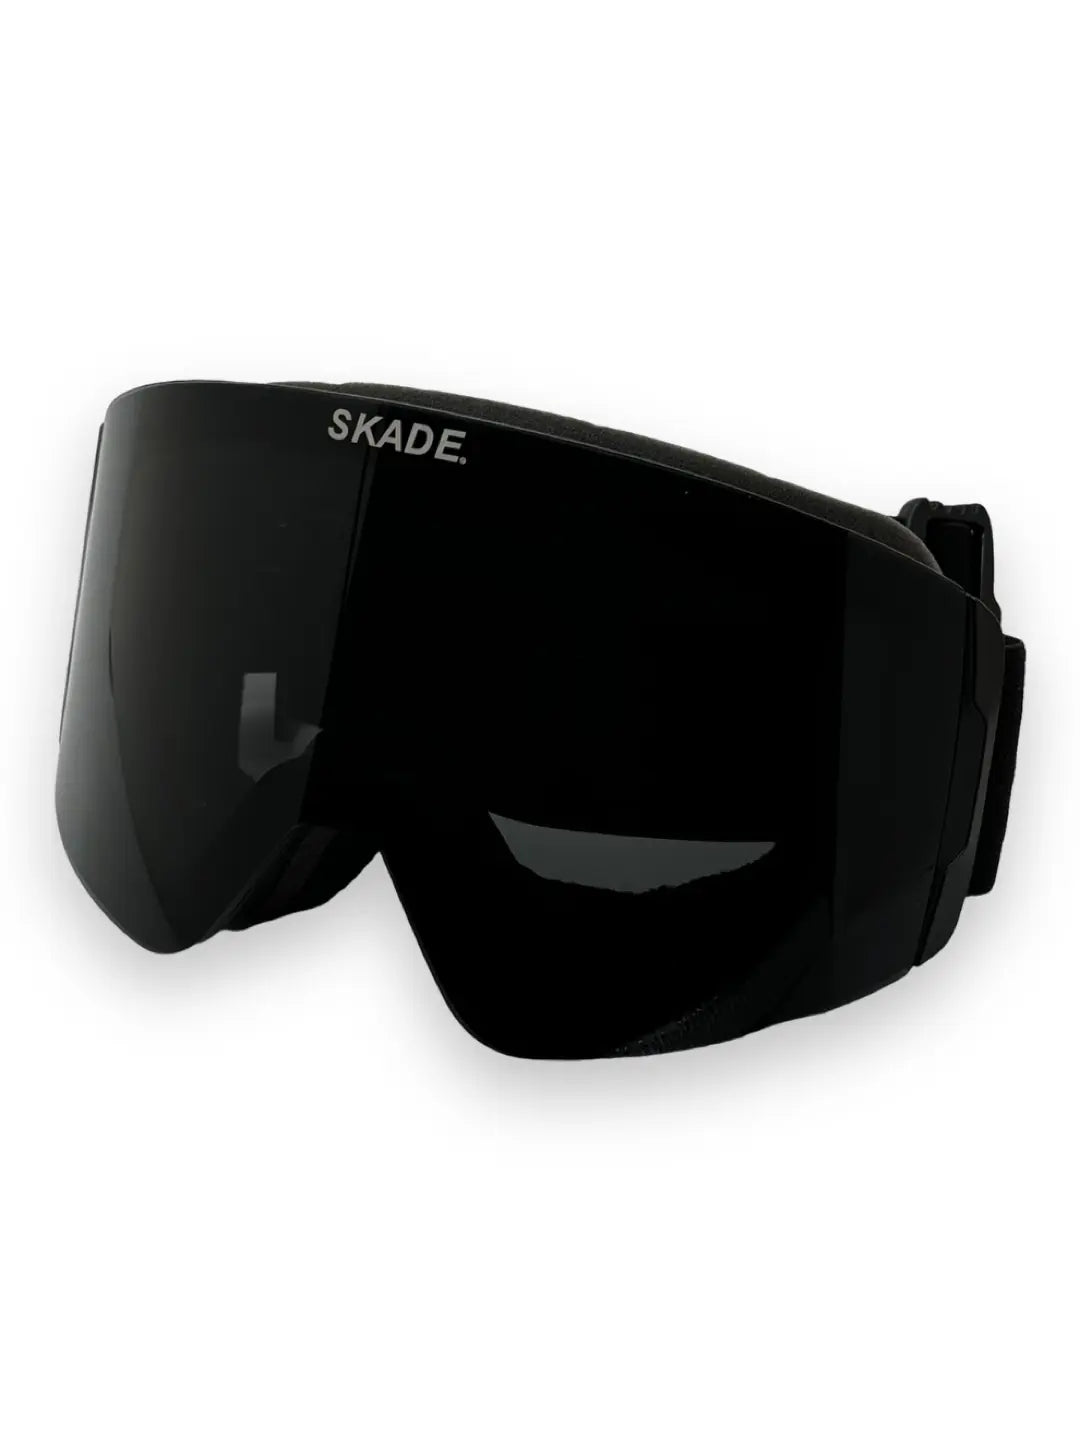 a pair of ski goggles on a white background